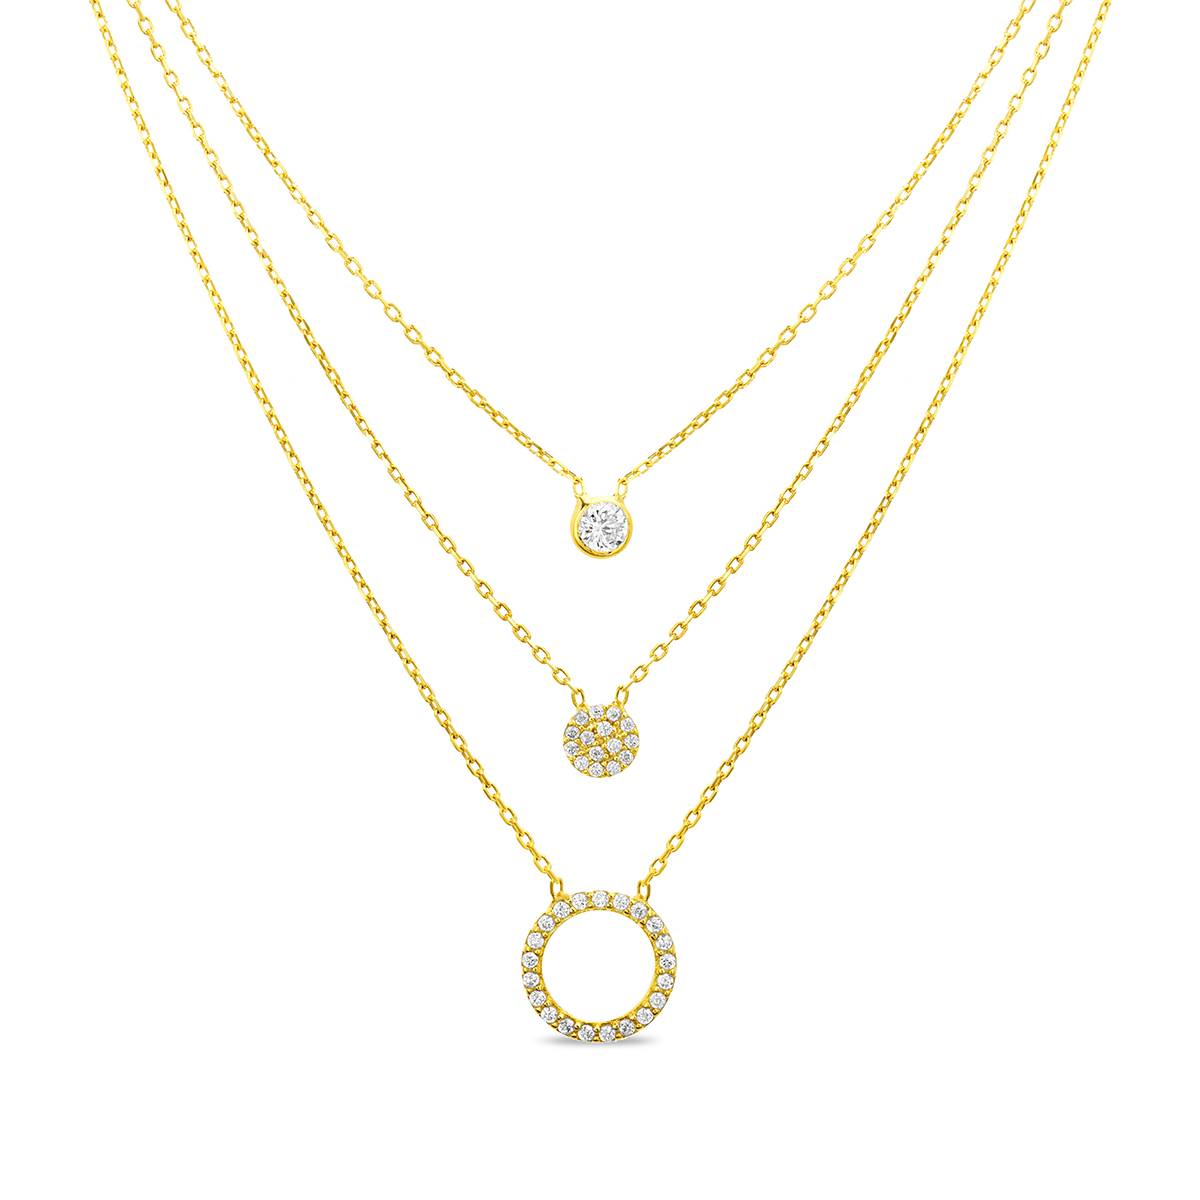 Creed Gold Plated Triple Layer Disc Necklace